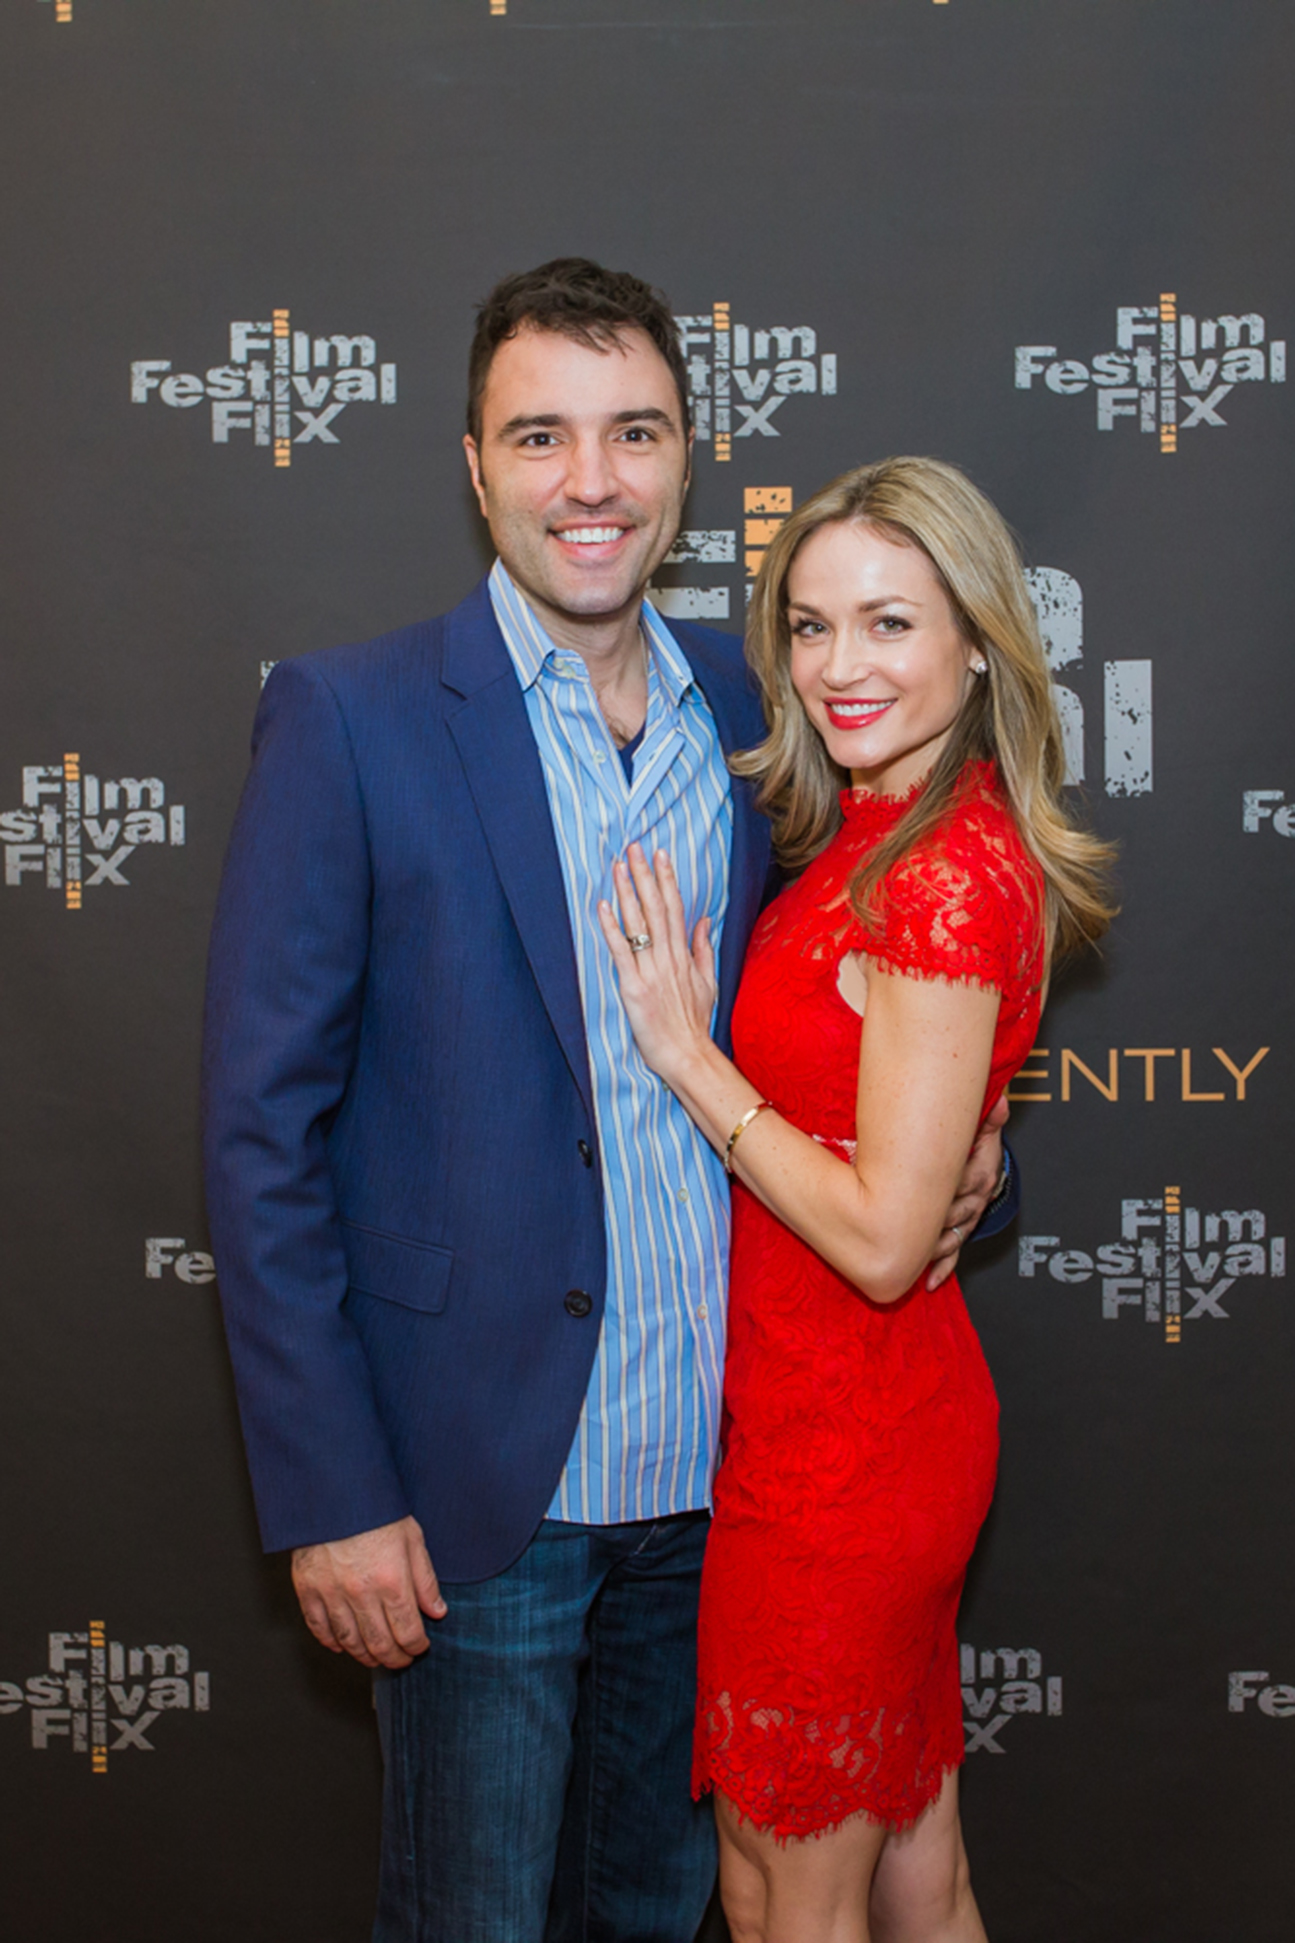 Katherine Randolph and Alex Petrovitch at the Los Angeles premiere of Adulthood